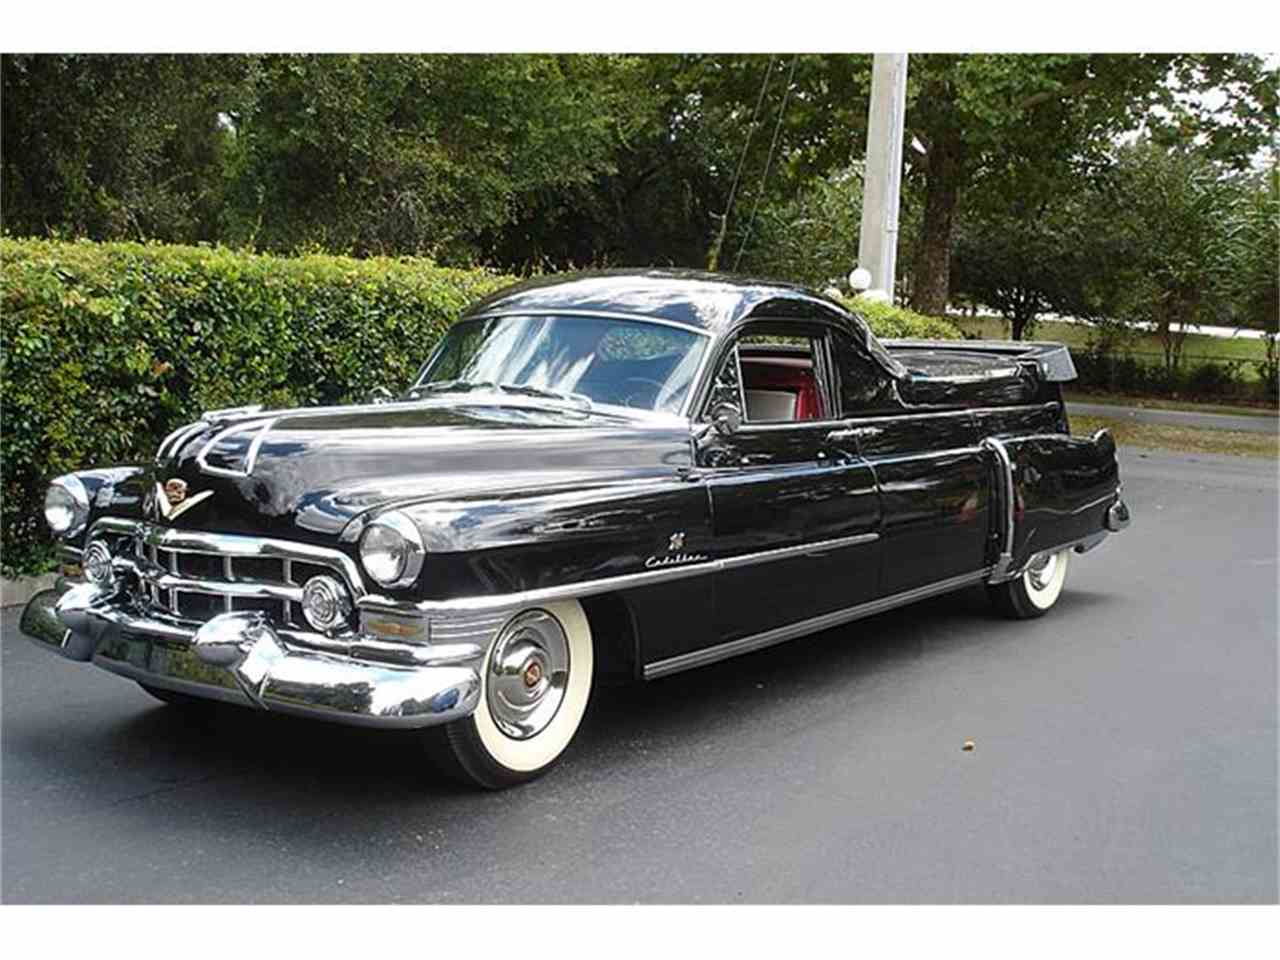 Image result for 1952 cadillac pictures